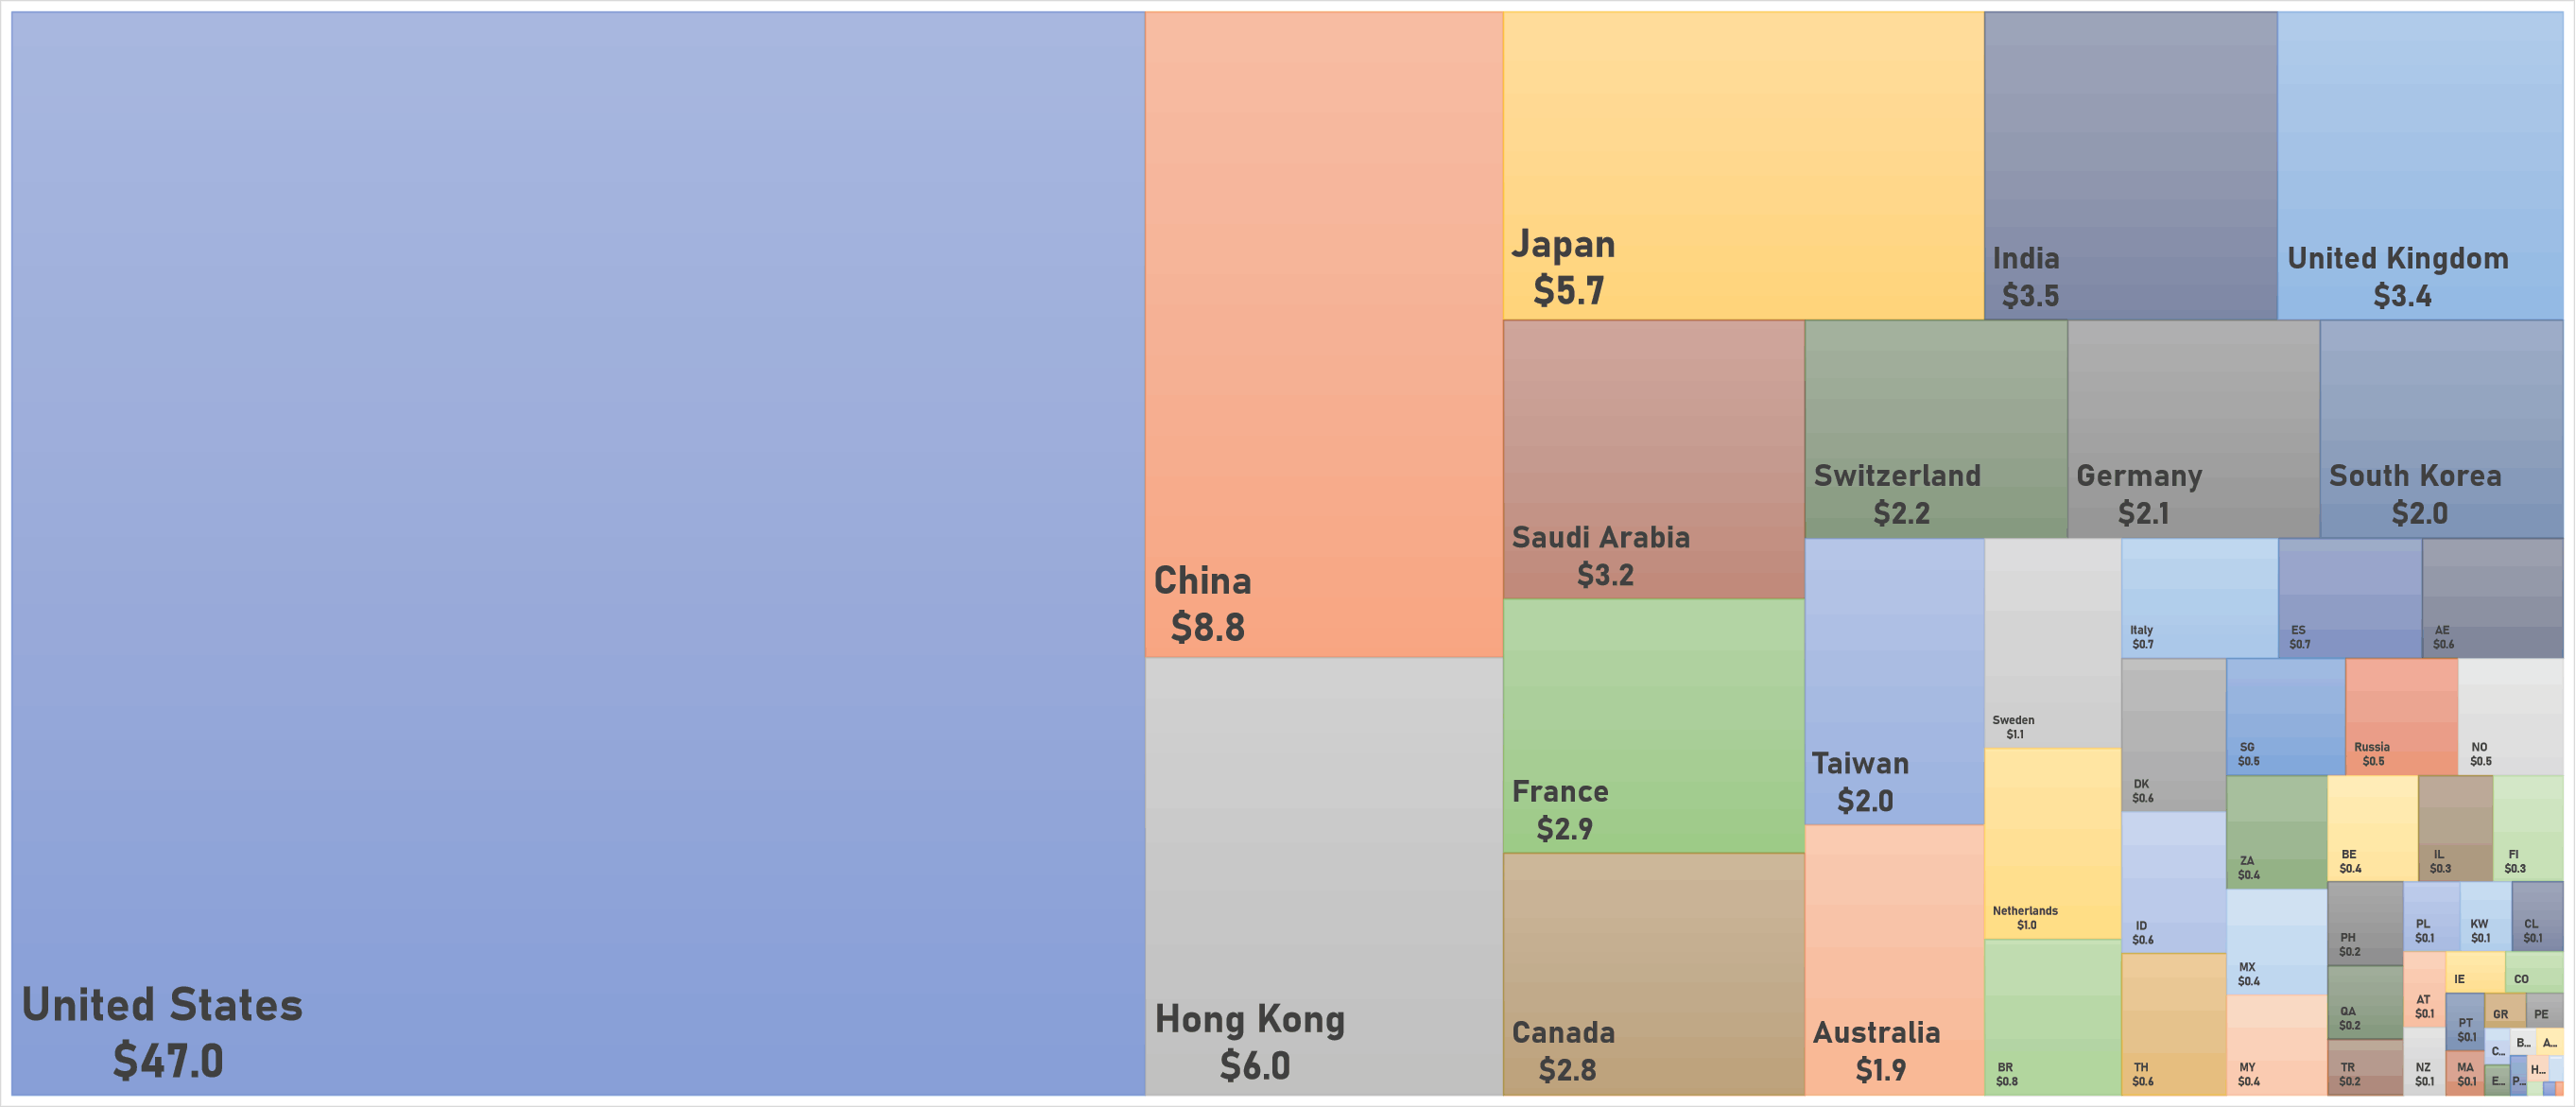 World Market Capitalization (USD Trillion) By country | Sources: phipost.com, FactSet data